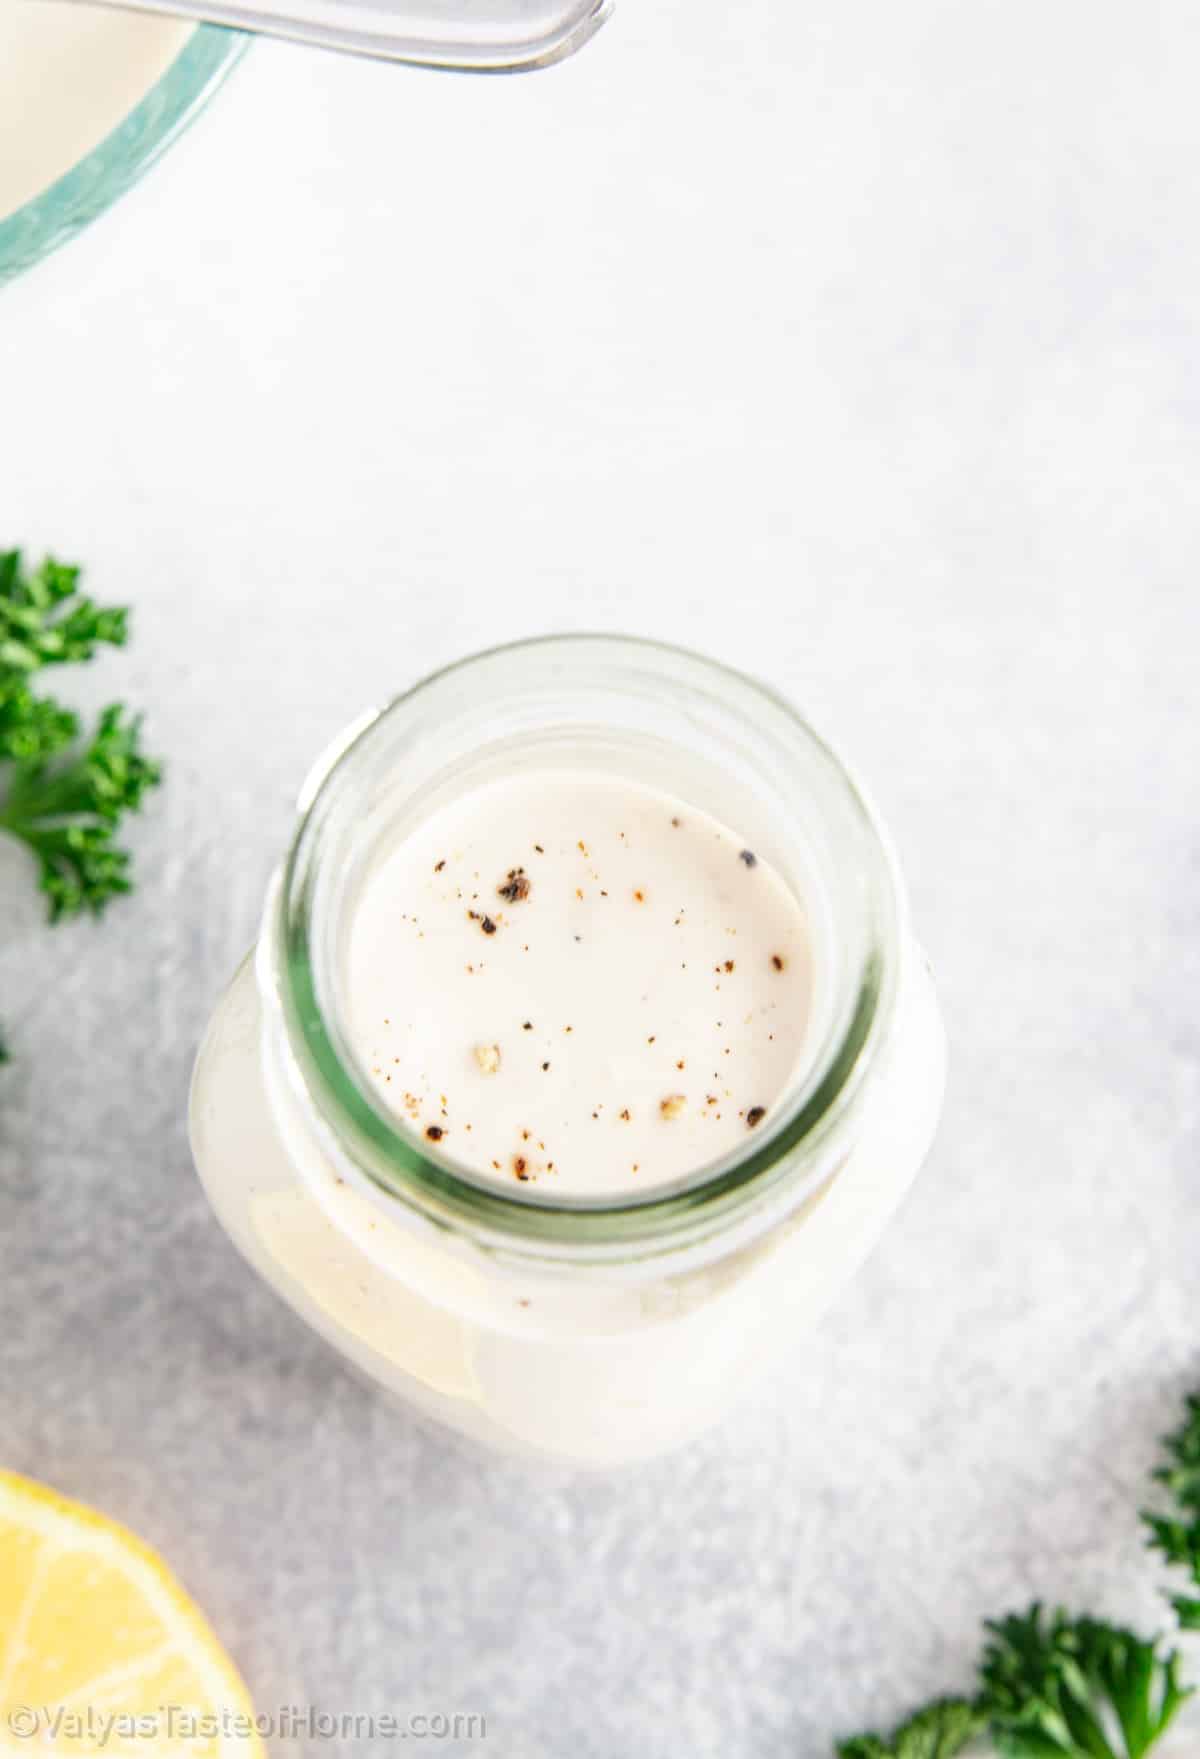 This Caesar Salad Dressing Recipe is going to give you the classic flavors with pantry staple ingredients for the most delicious and easy dressing recipe ever!